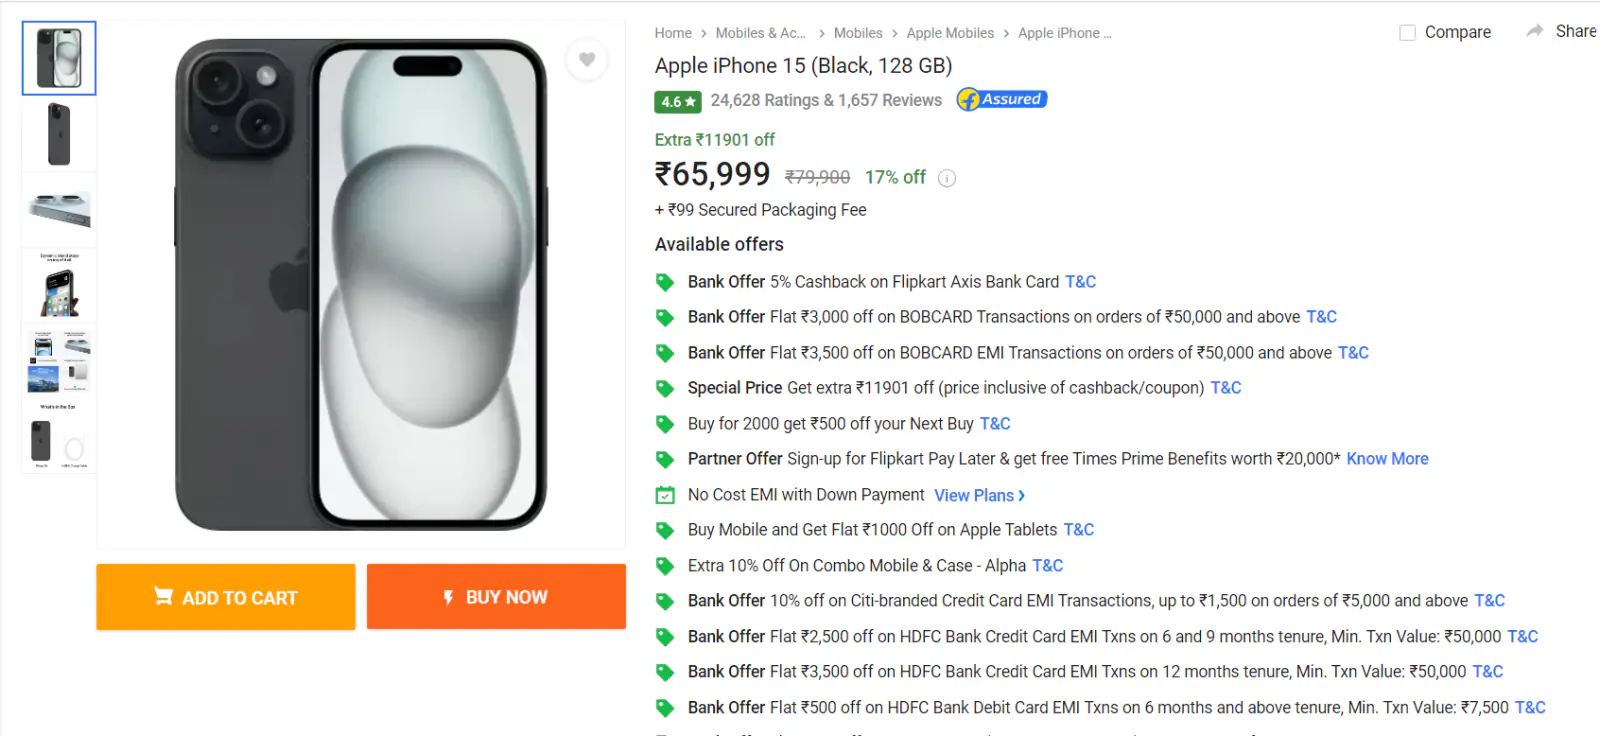 Tremendous discount on iPhone 15, opportunity to buy it at the lowest price from Flipkart